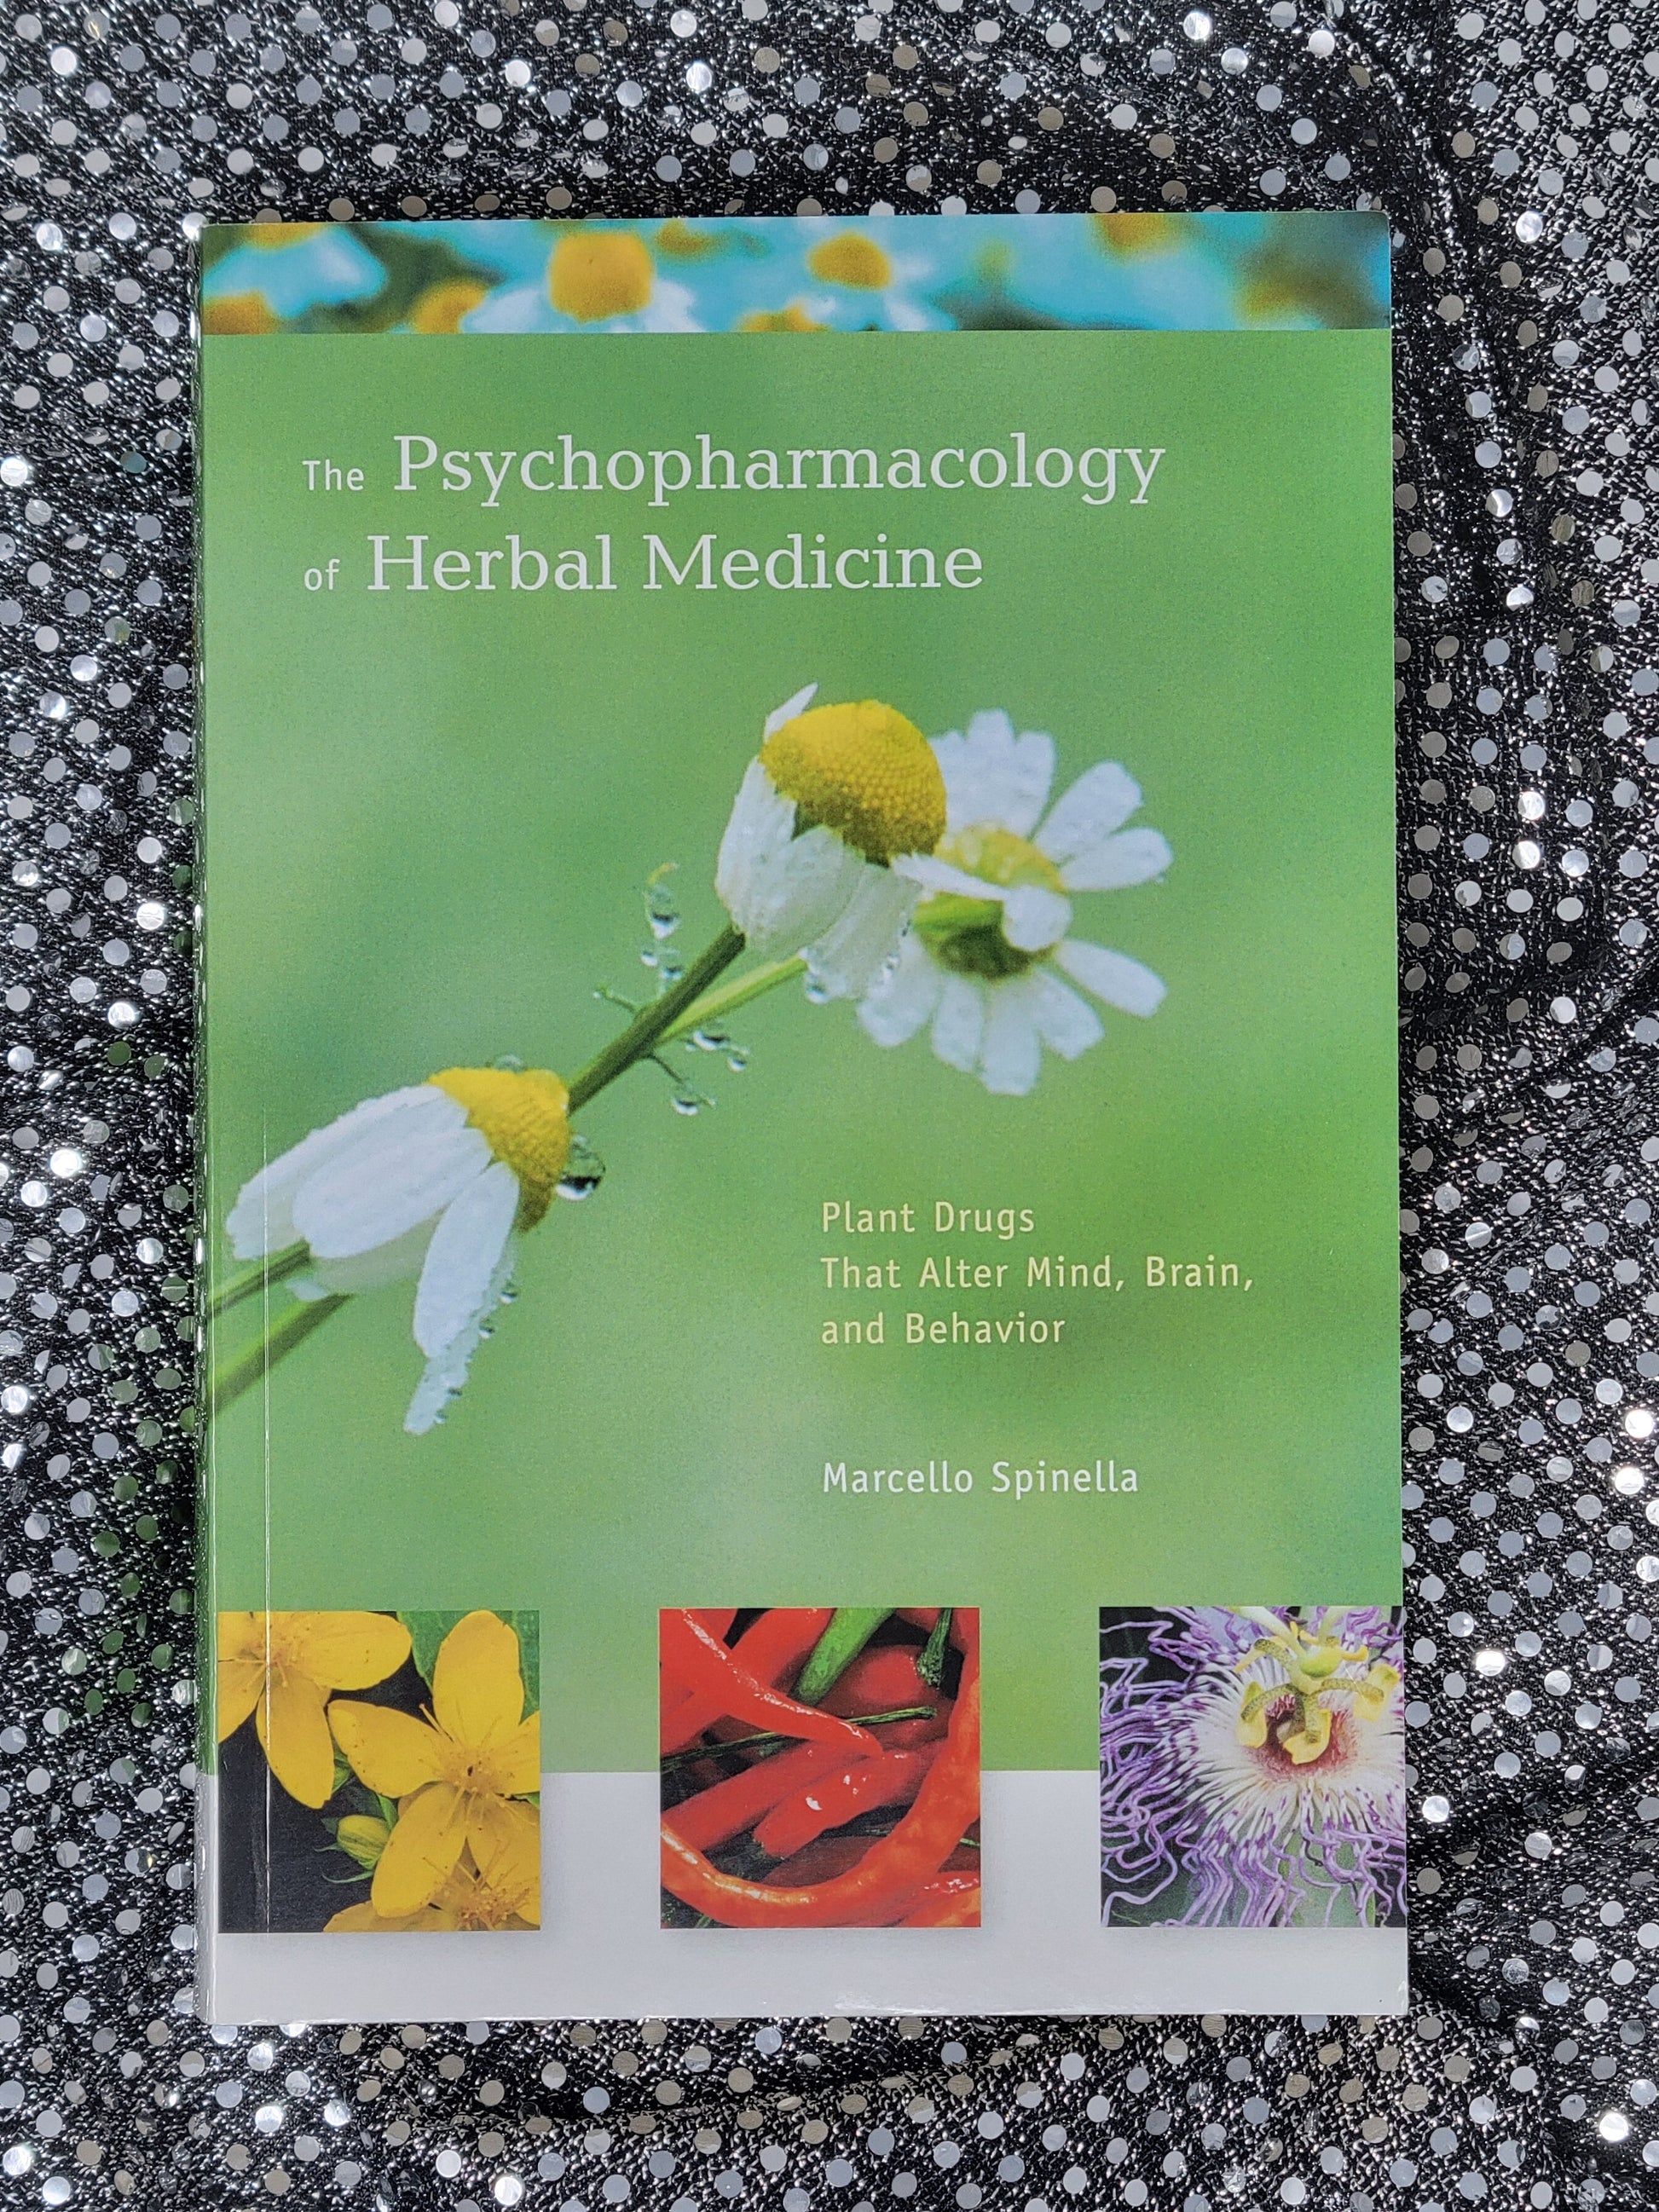 The Psychopharmacology of Herbal Medicine-MARCELLO SPINELLA